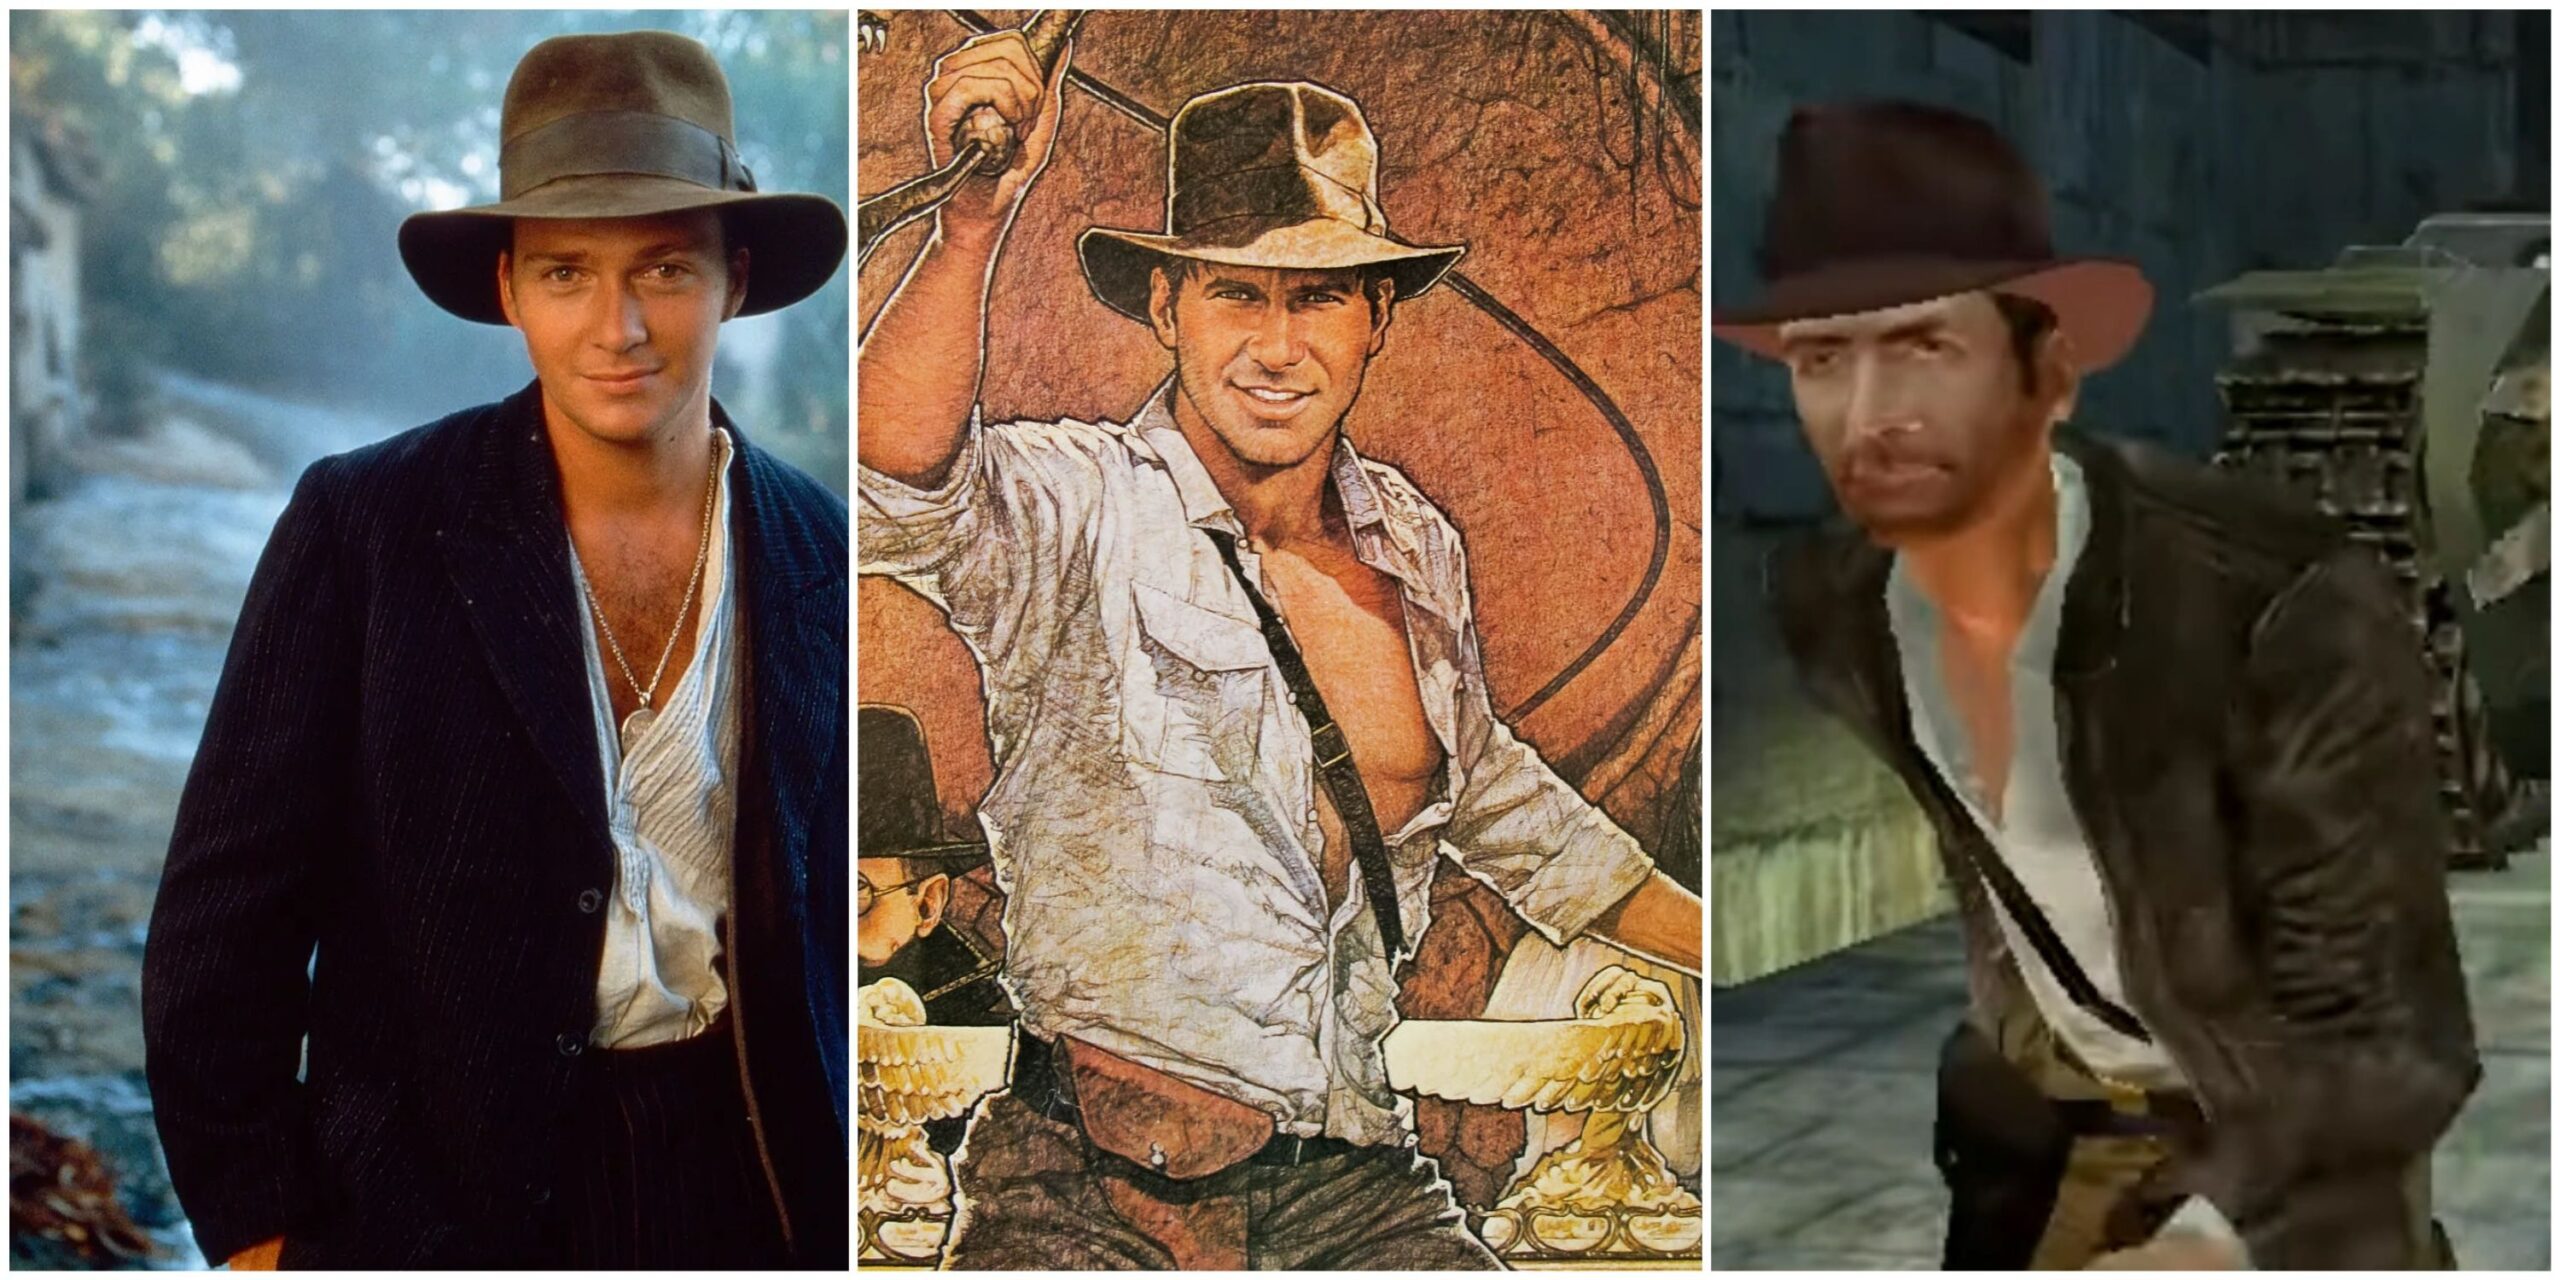 Indiana Jones’ Most Impressive Feats Before The Movies